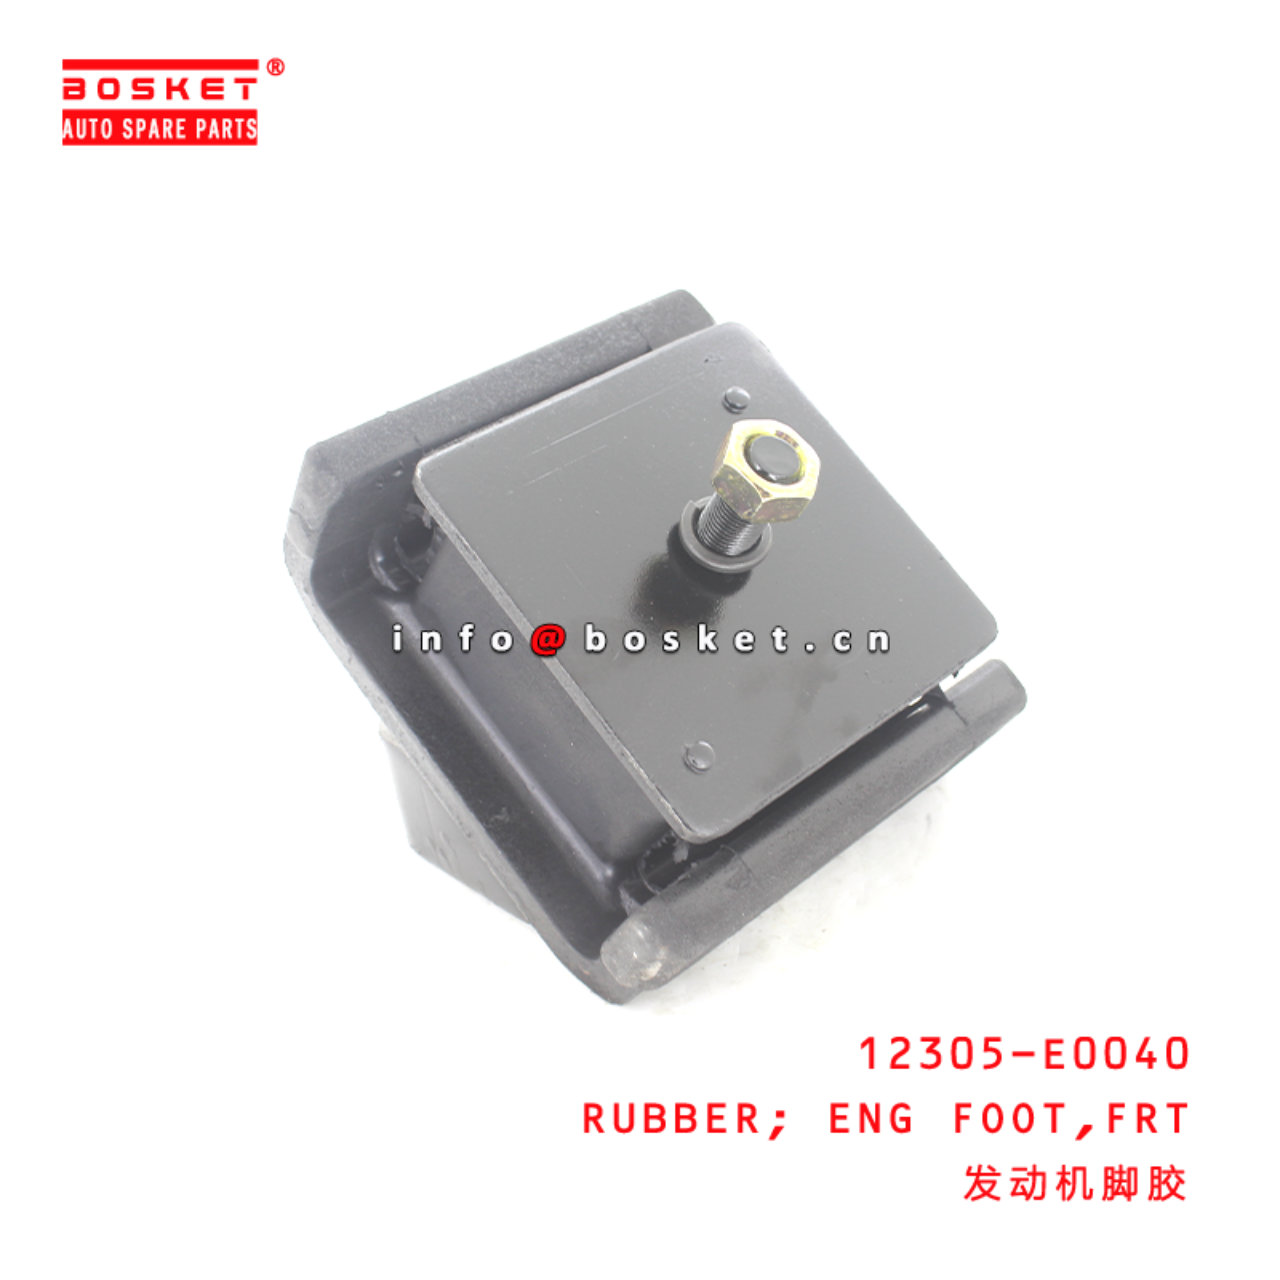 12305-E0040 Front Engine Foot Rubber Suitable for ISUZU HINO